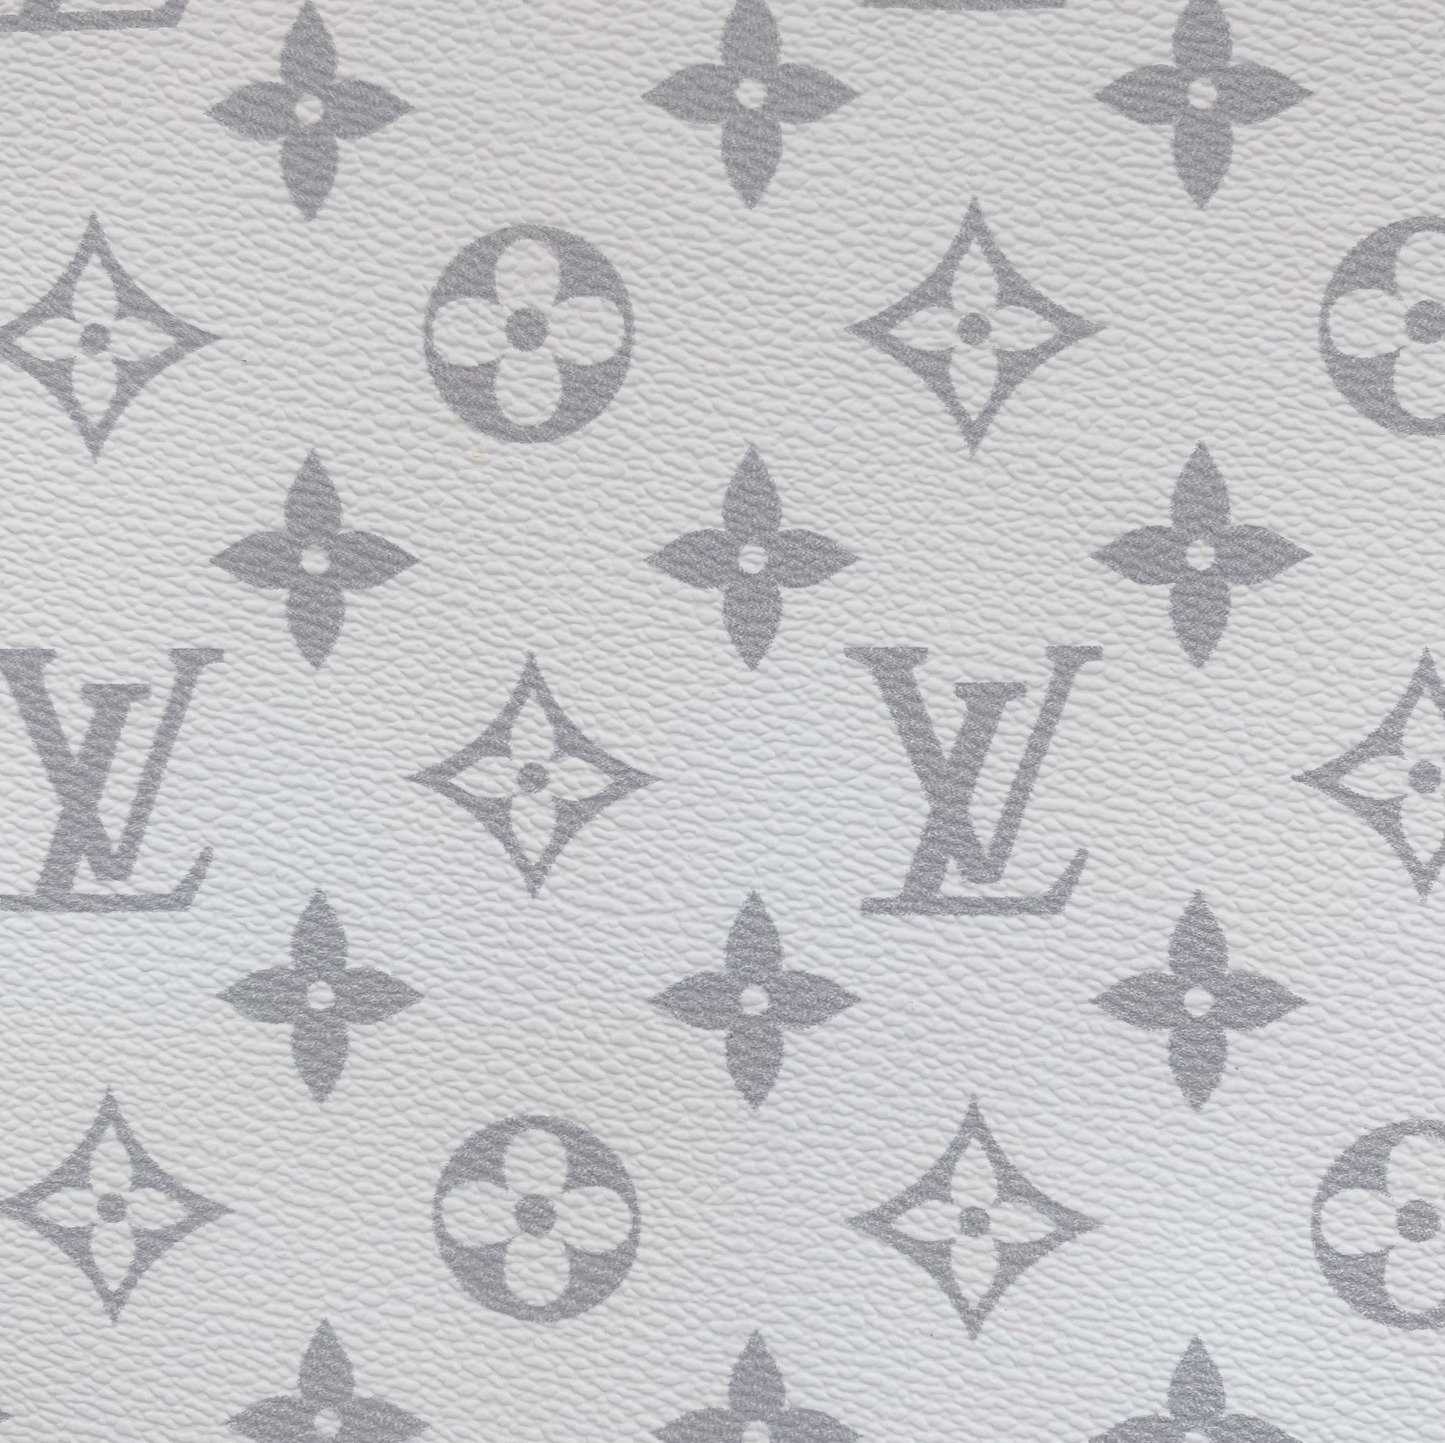 LV leather No.2(black),Louis Vuitton leather,LV leather